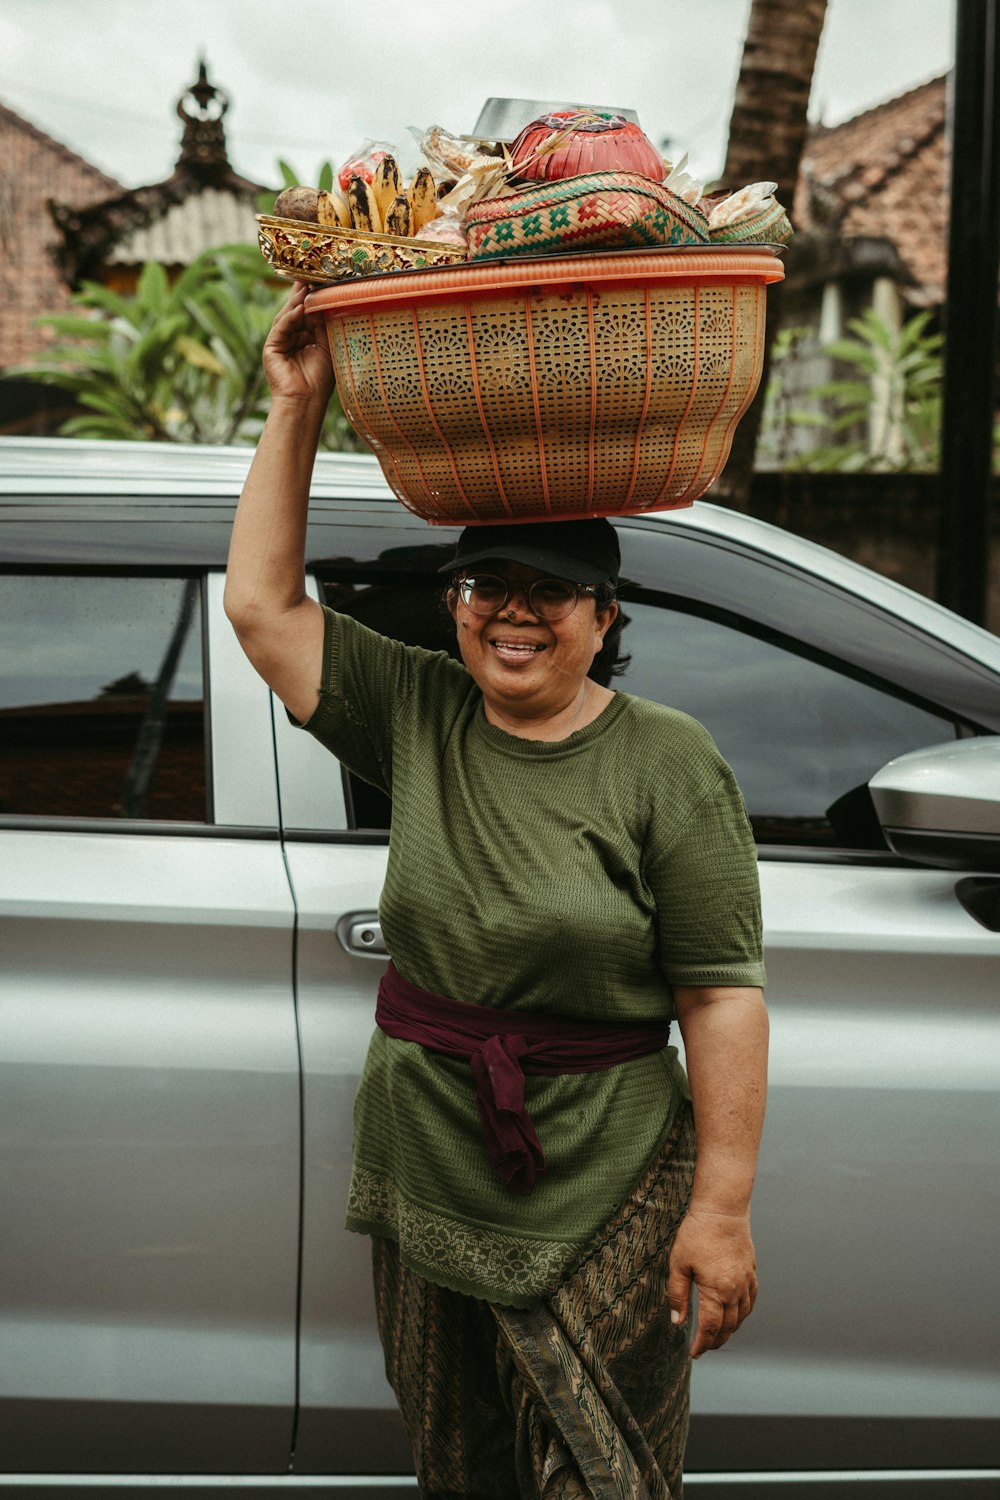 a woman carrying a basket on top of her head